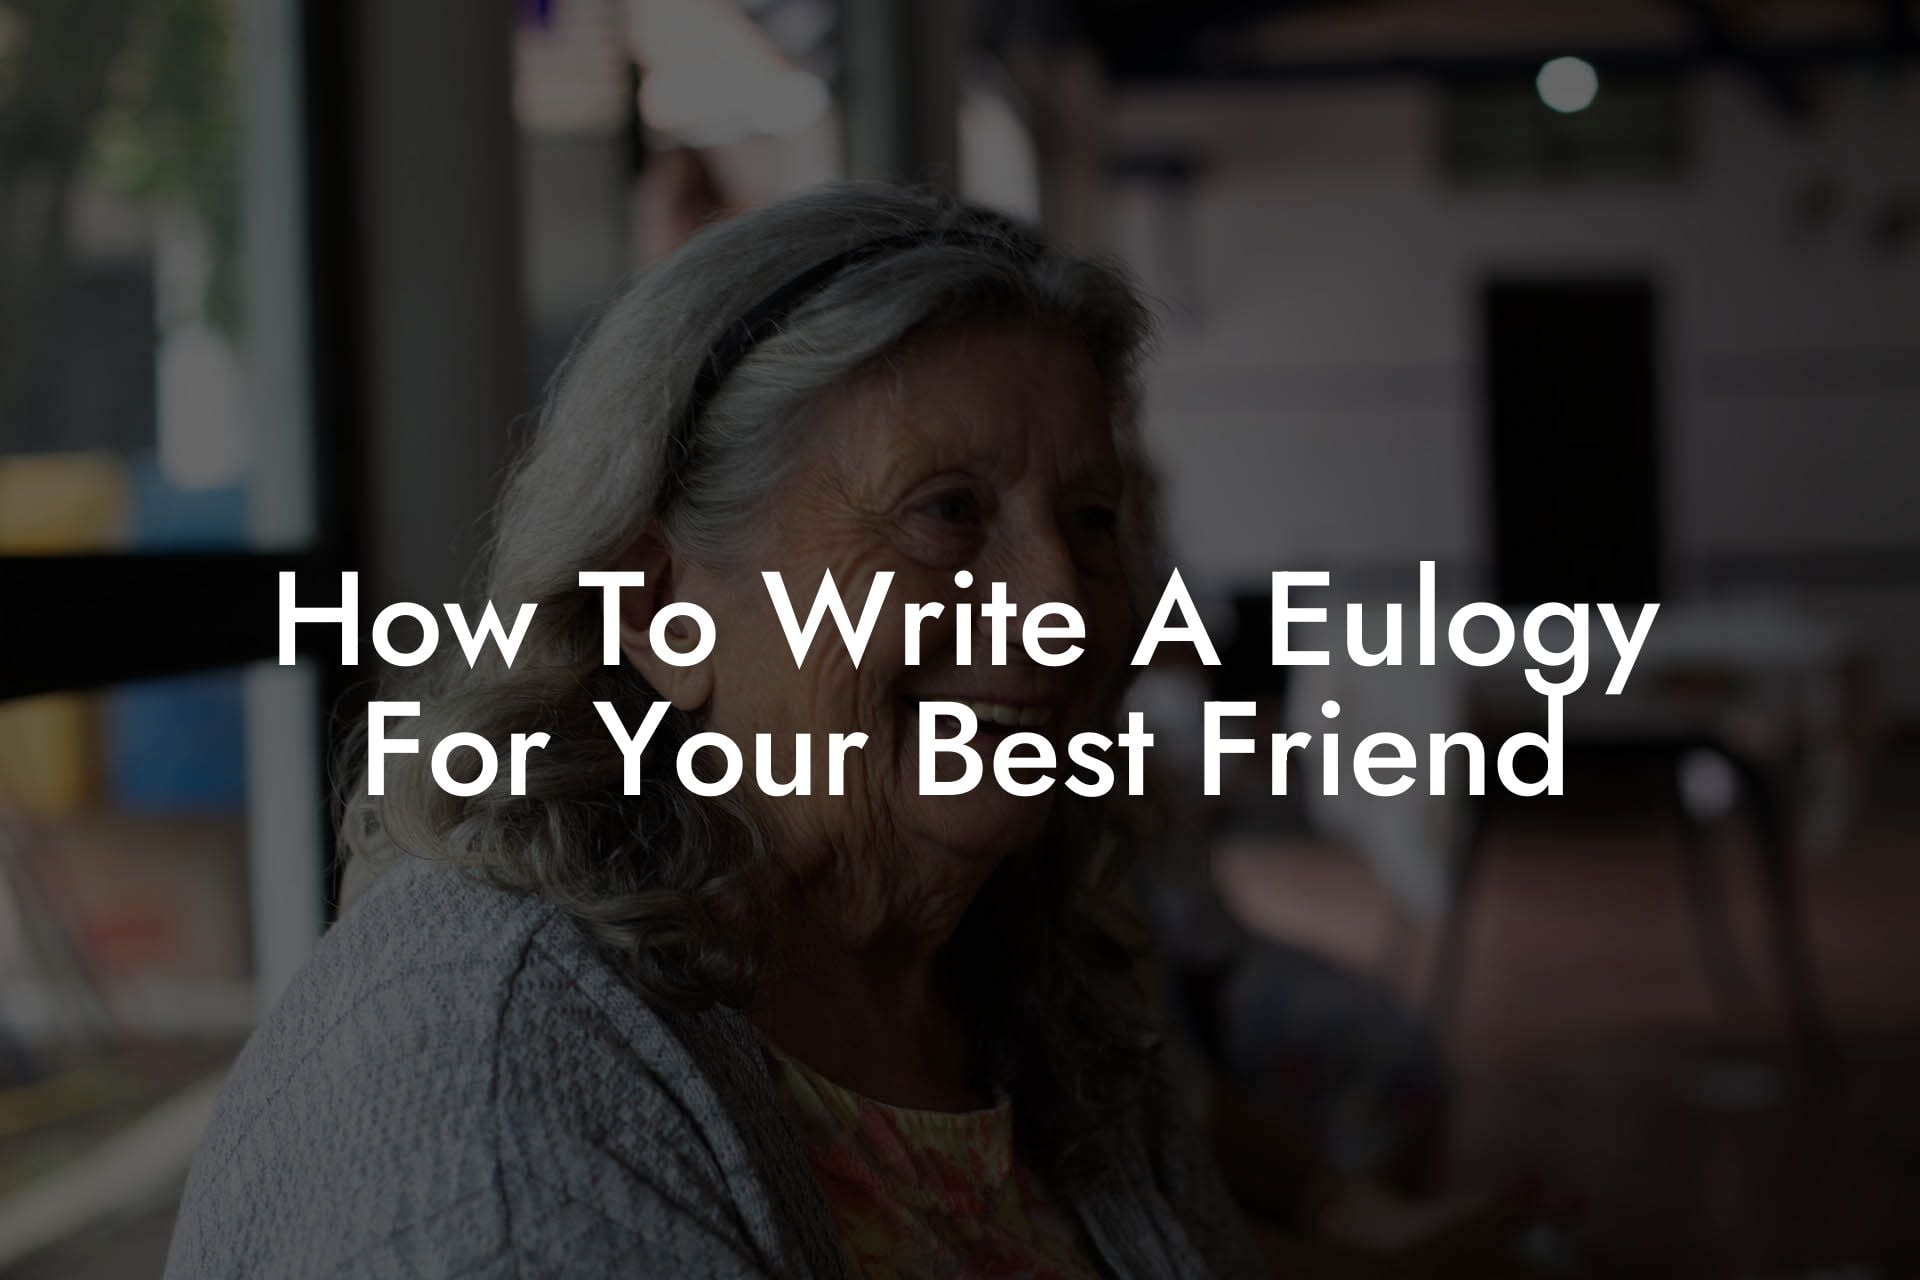 How To Write A Eulogy For Your Best Friend